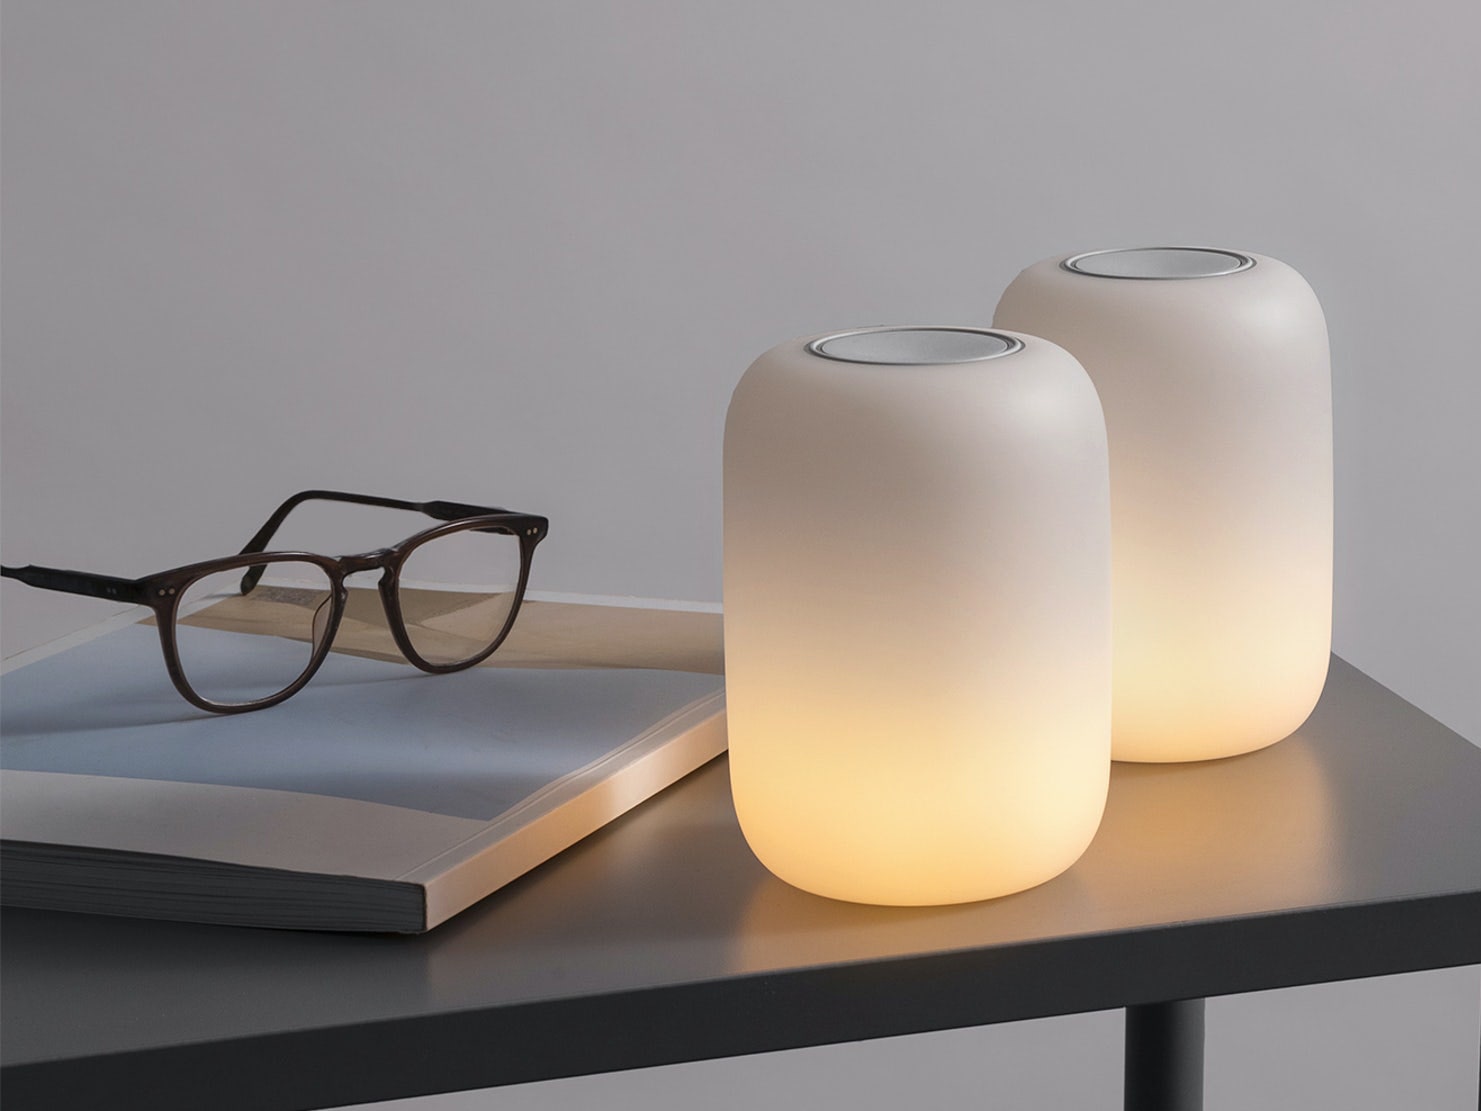 Casper Glow Lights sitting on table next to book and glasses